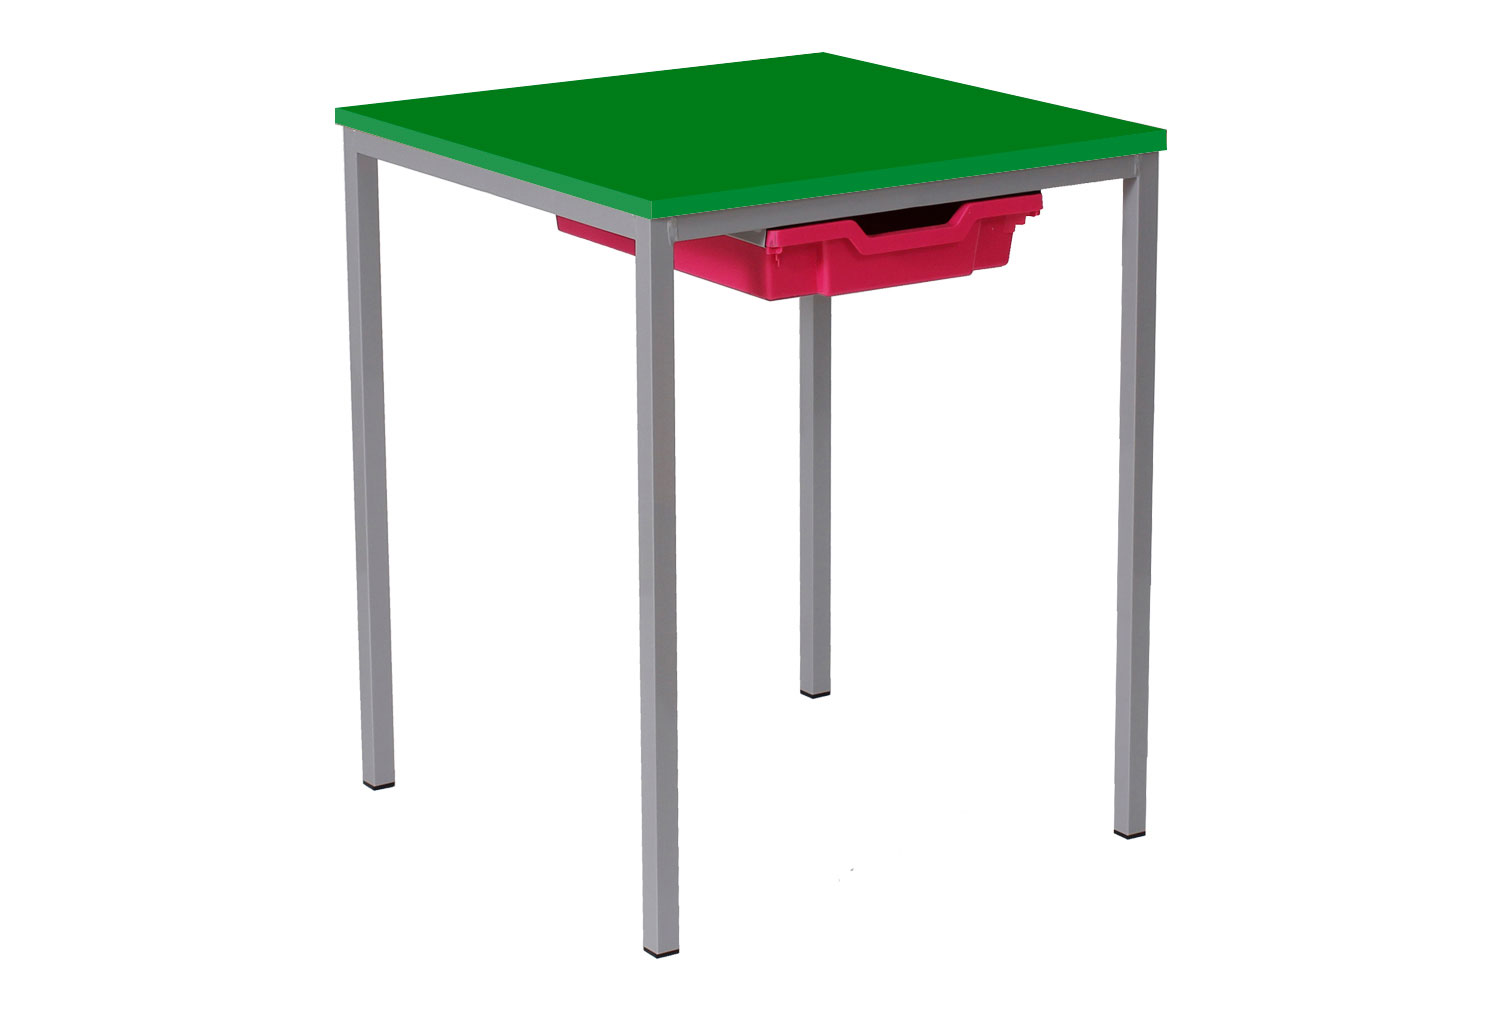 Qty 4 - Educate Student Square Table with Tray 14+ Years (PVC Edge), Dark Grey Frame, Beech Top, Grey Trays